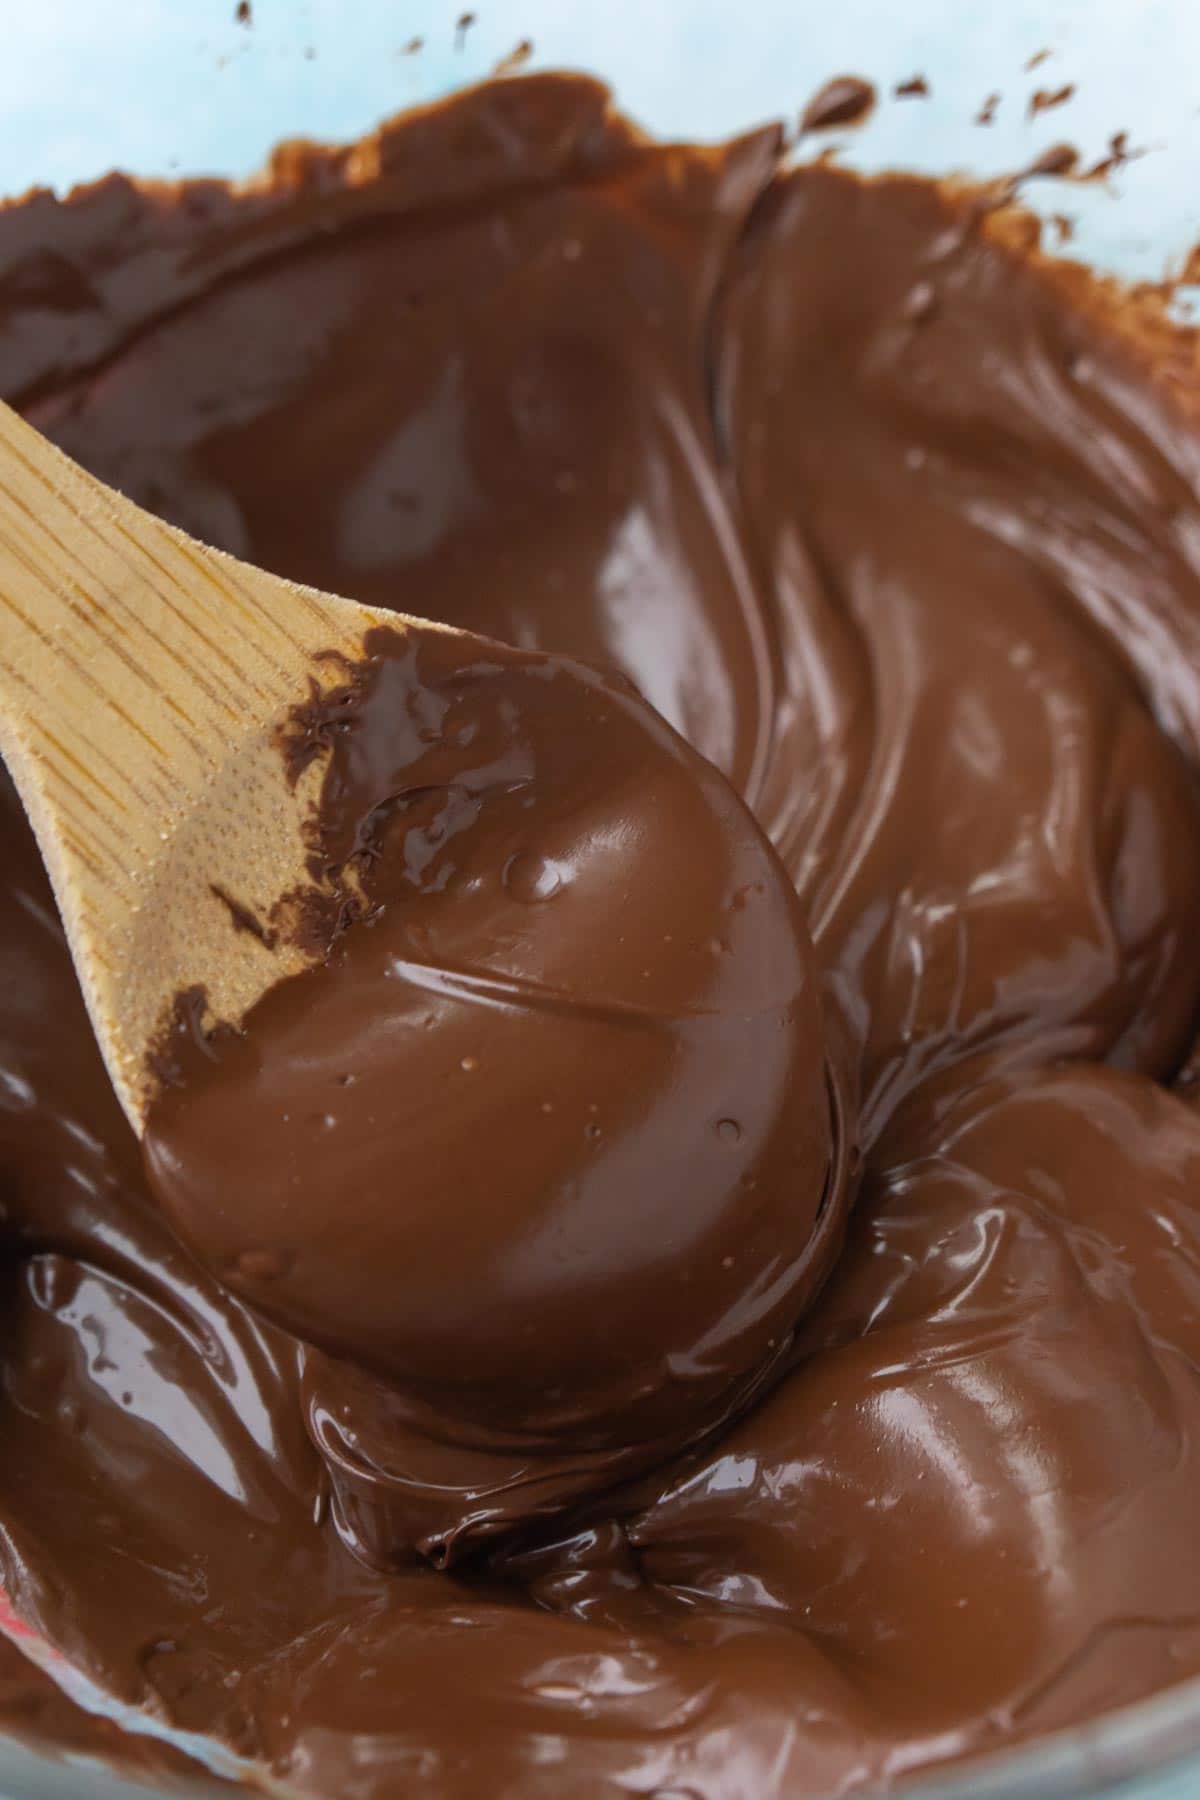 Wooden spoon in a bowl of melted chocolate